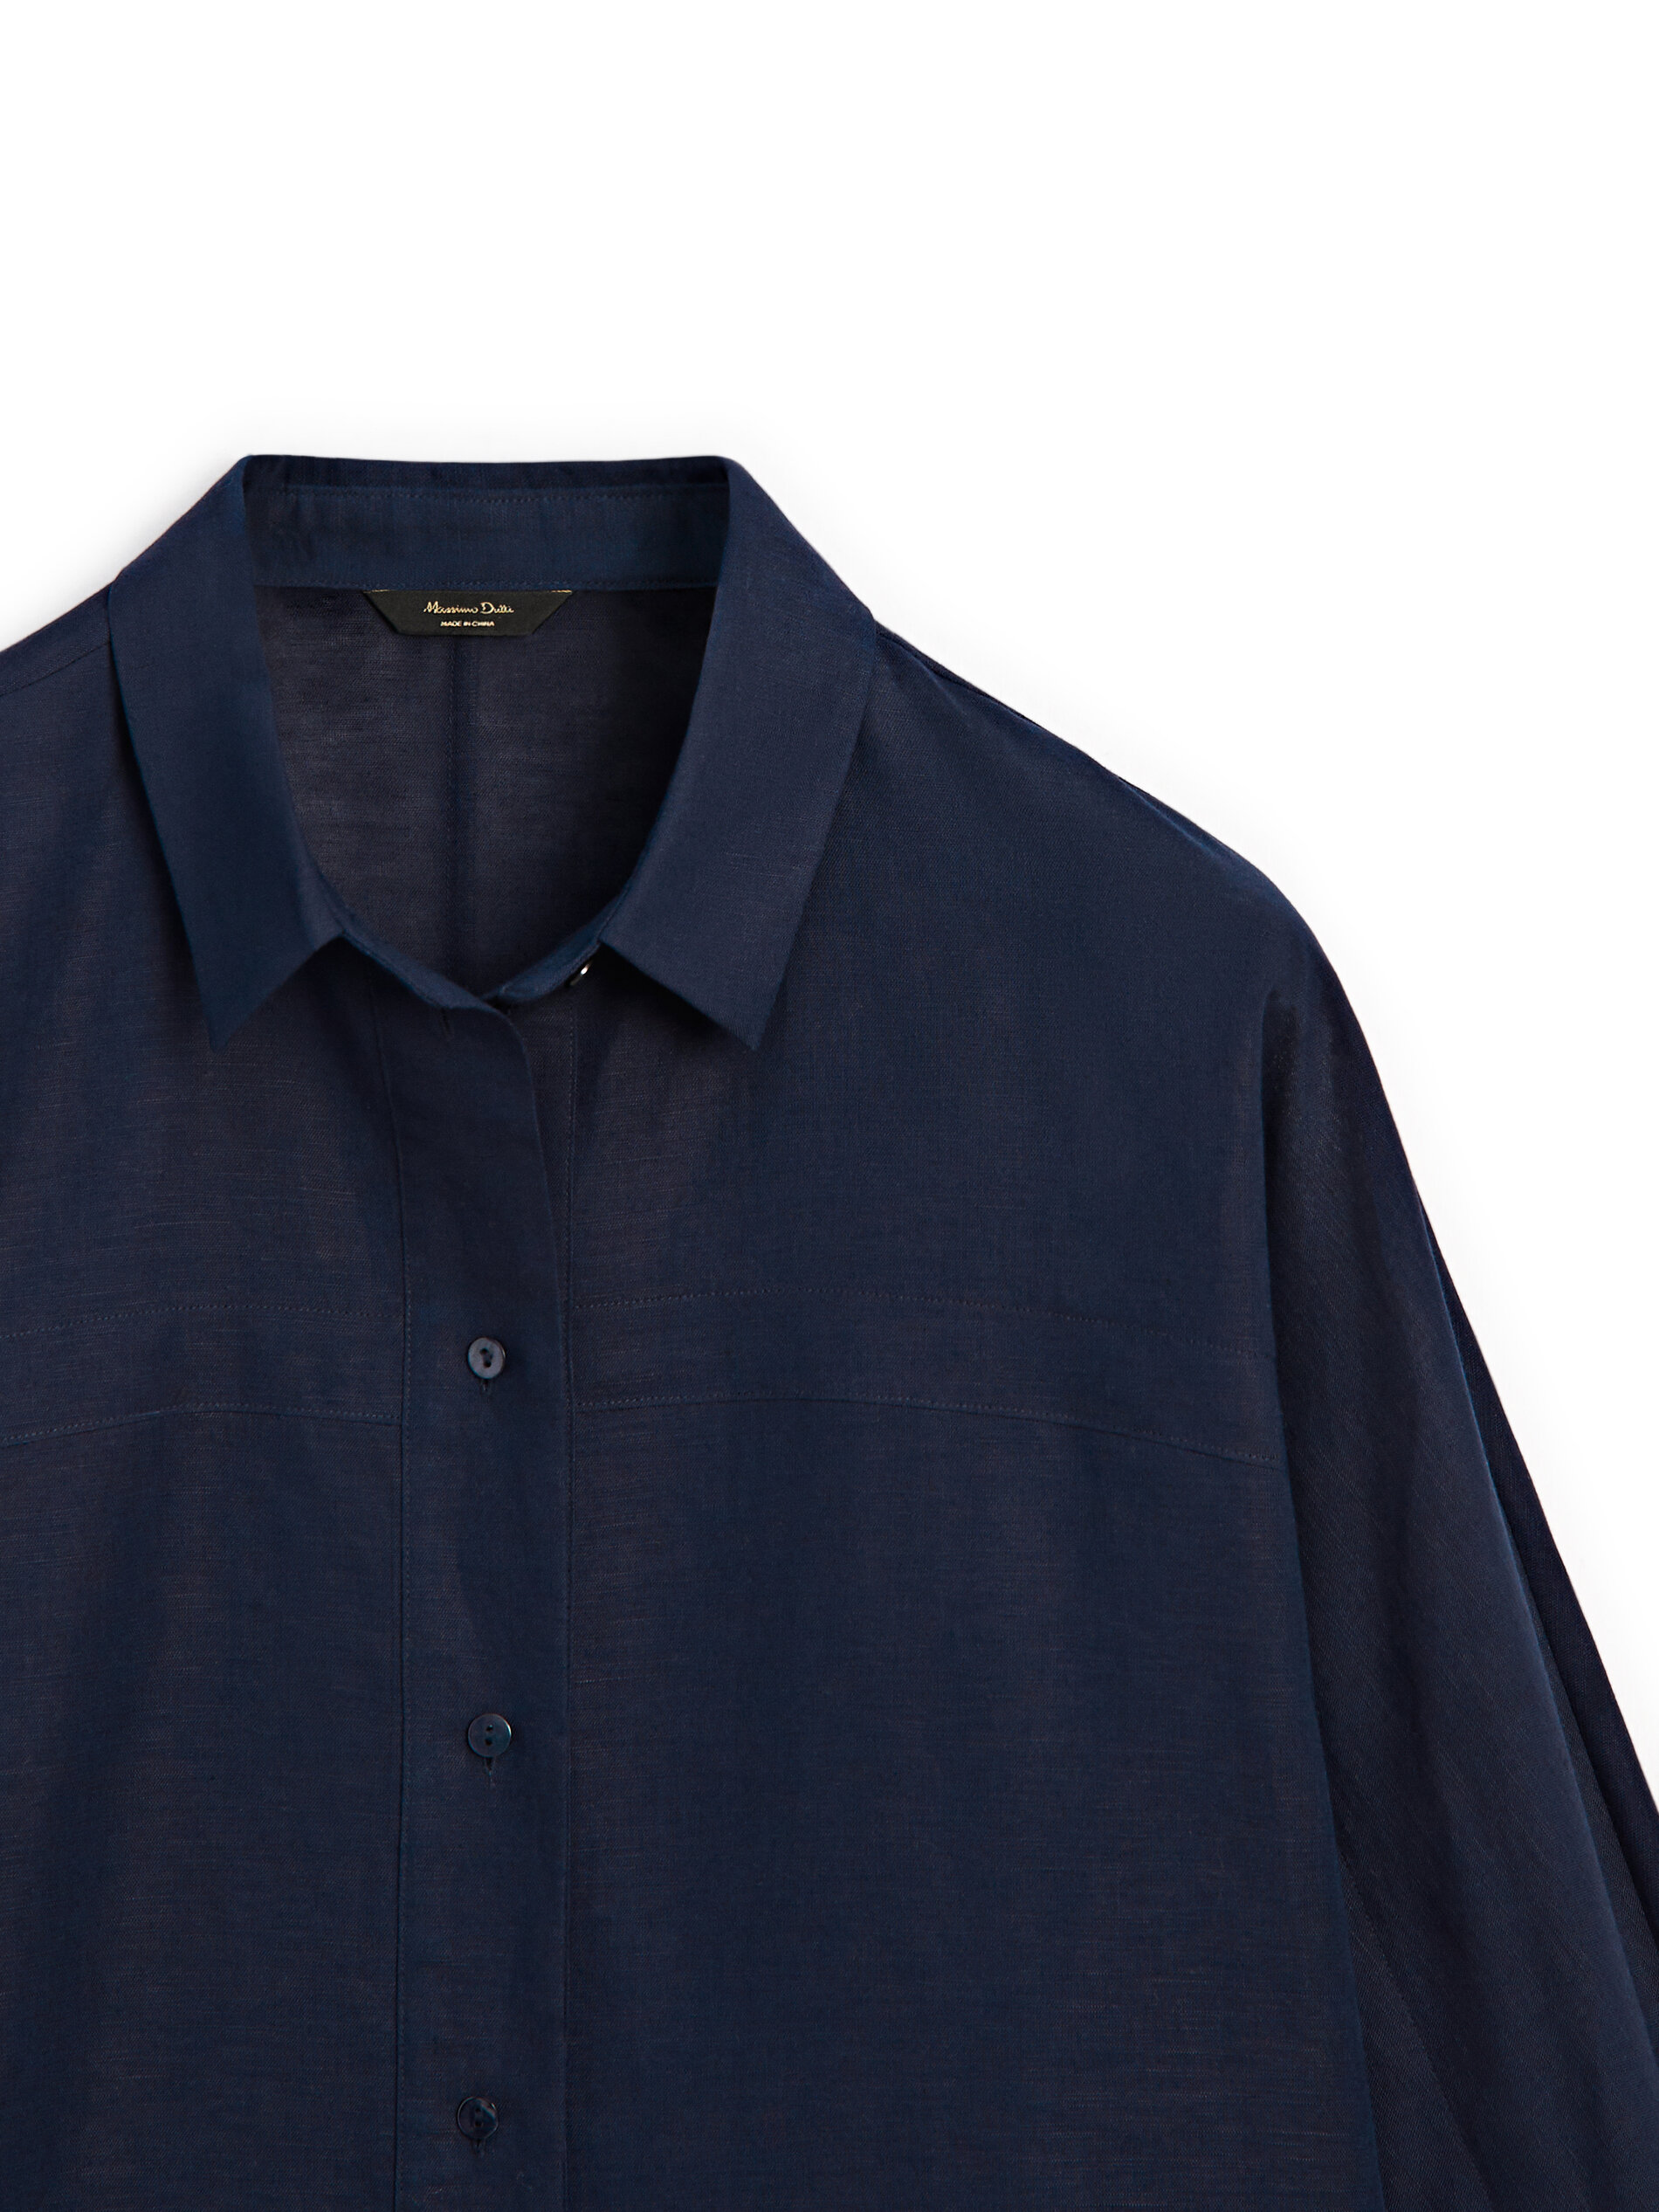 Shirt with cotton and linen